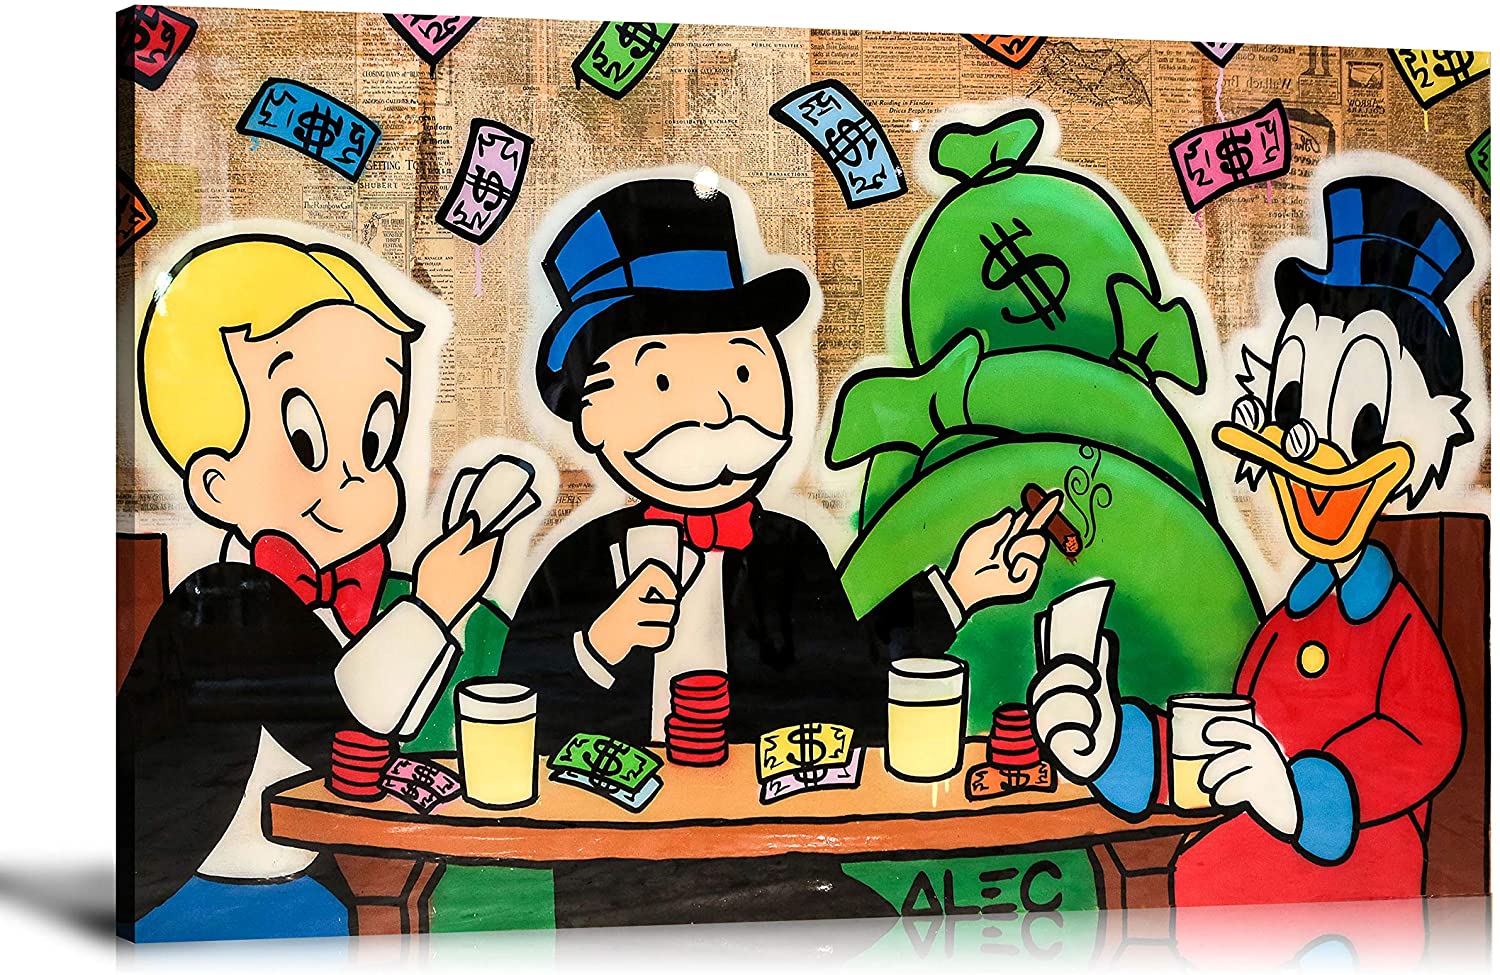 Newartprint ALEC Monopoly HD Printed Oil Paintings Home Wall Decor Art On Canvas Playing Cards 24x36inch Unframed: Amazon.ca: generic